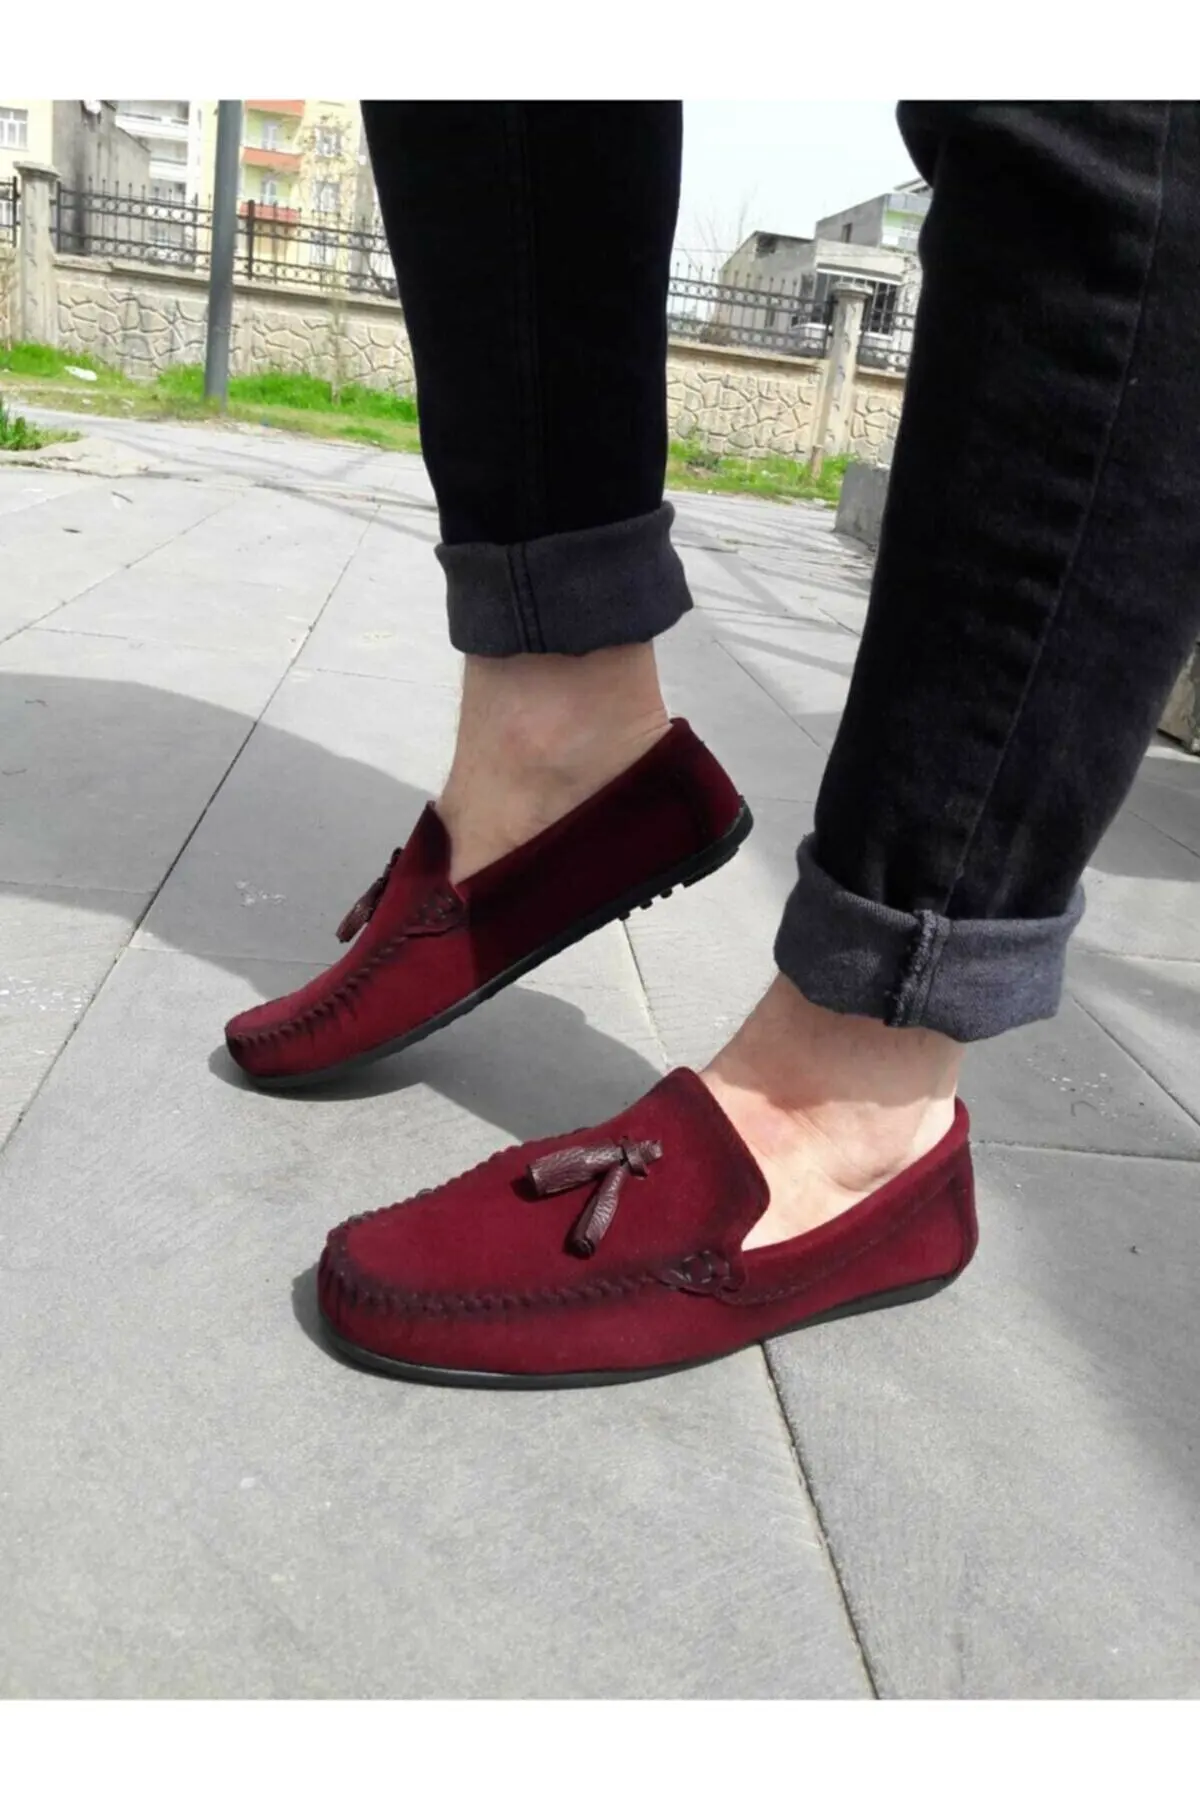 Men's Tasseled Loefaer Suede Claret Red Shoes Casual Fashion Comfortable Stylish 2021 New Light And Soft